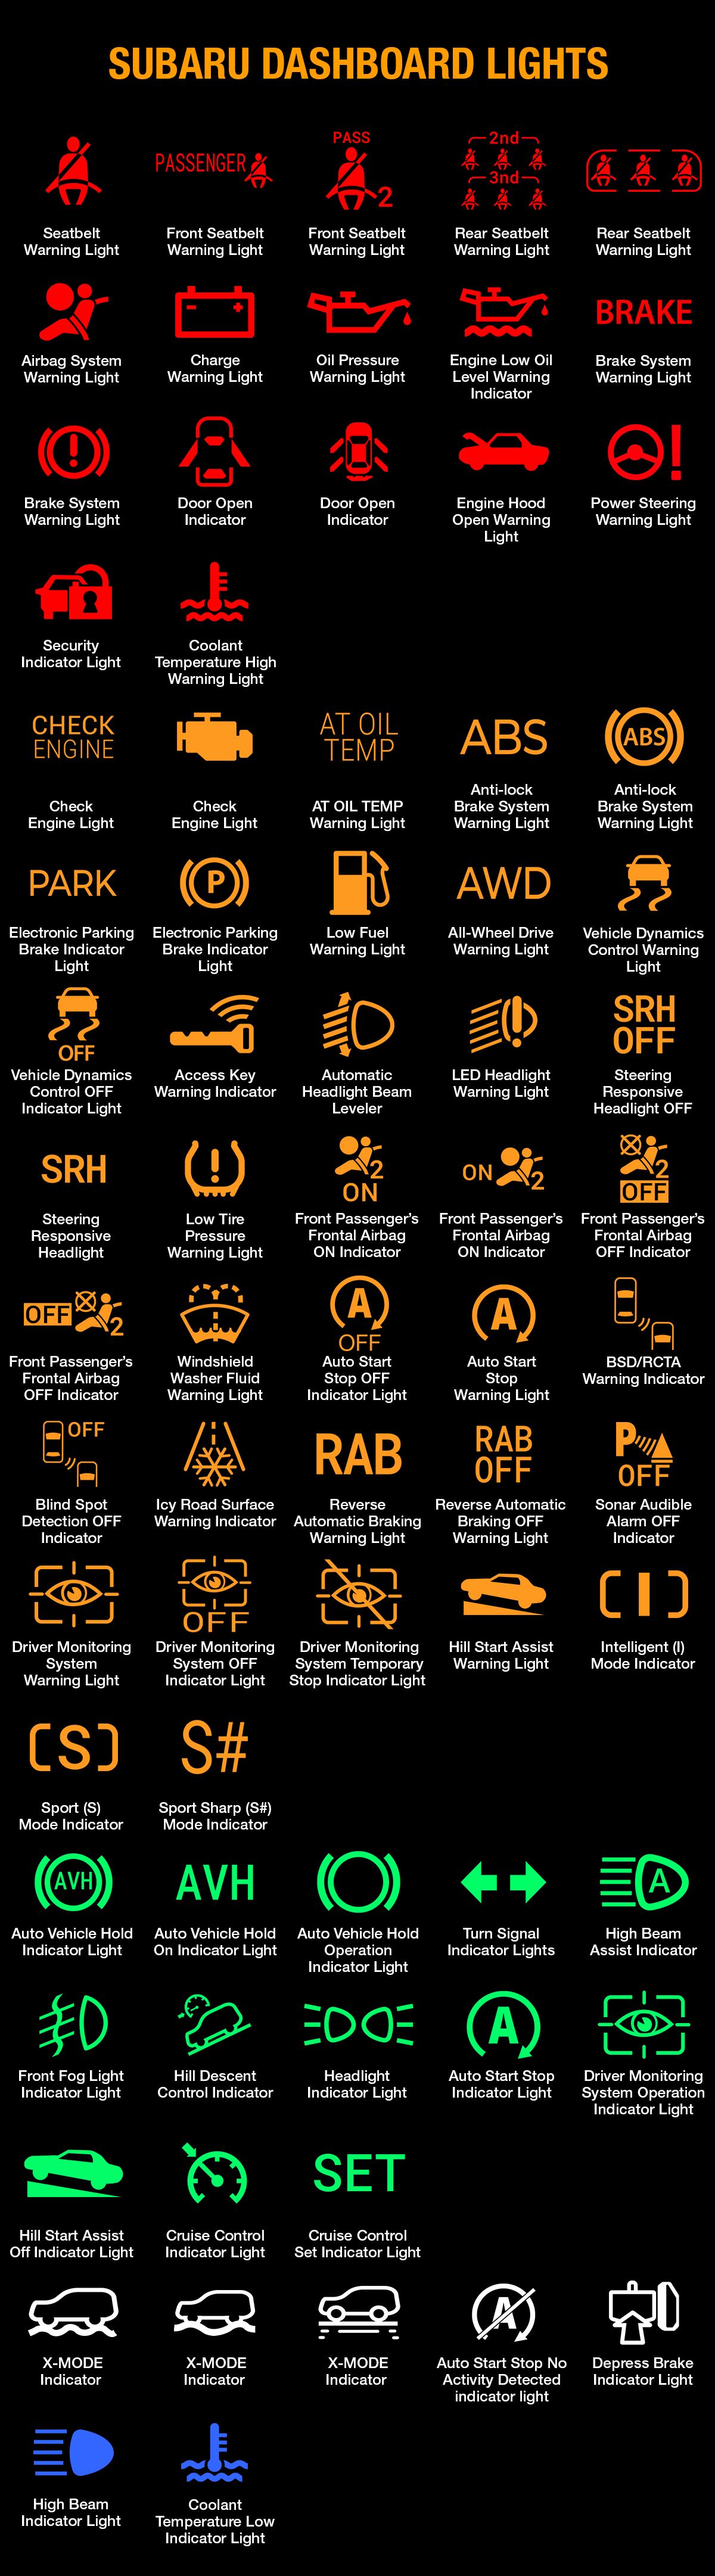 Subaru Dashboard Lights And Meanings (FULL List, FREE Download) Dash